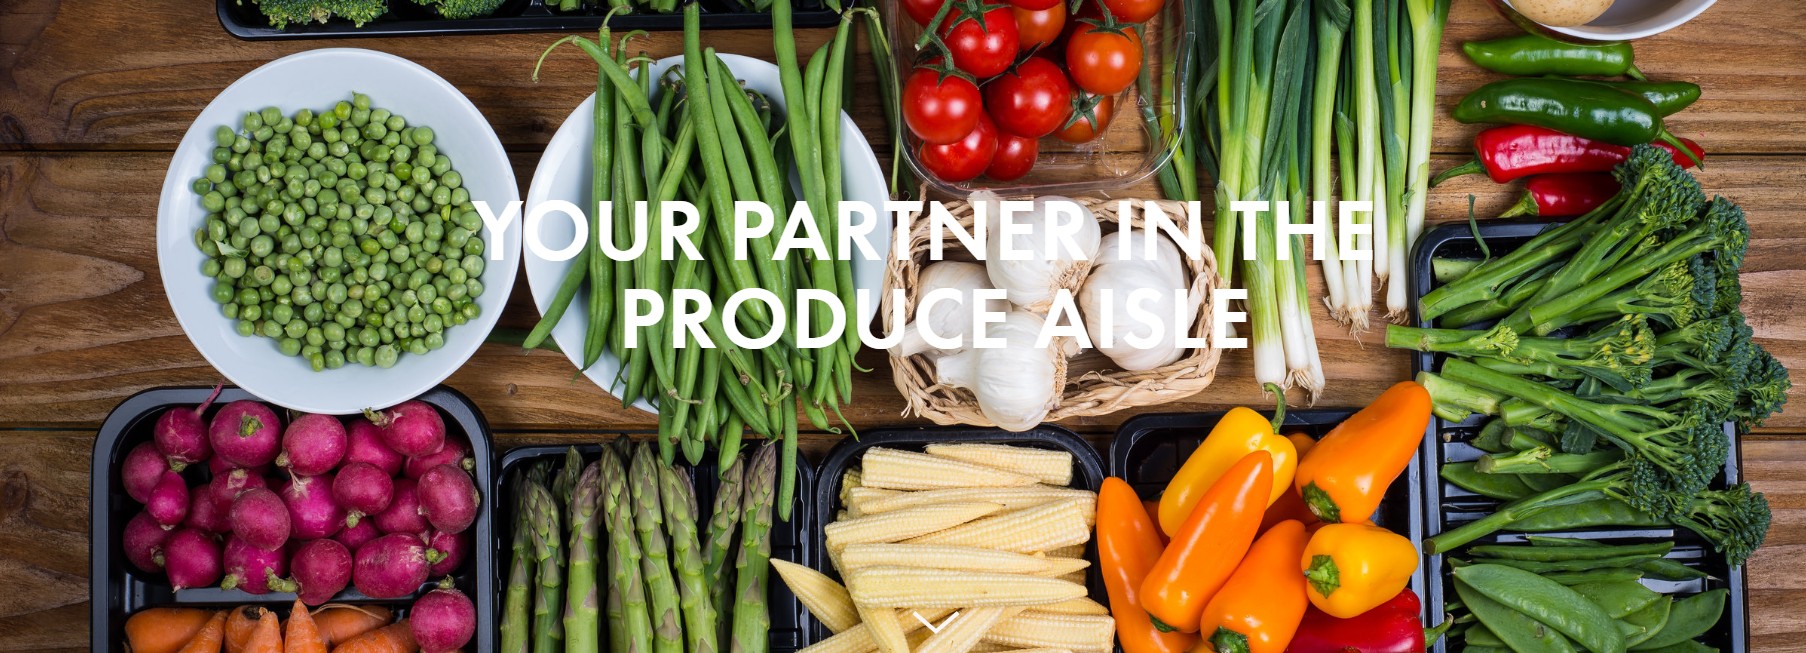 Finding The Best Organic Produce Delivery in NYC - E. Armata Inc.